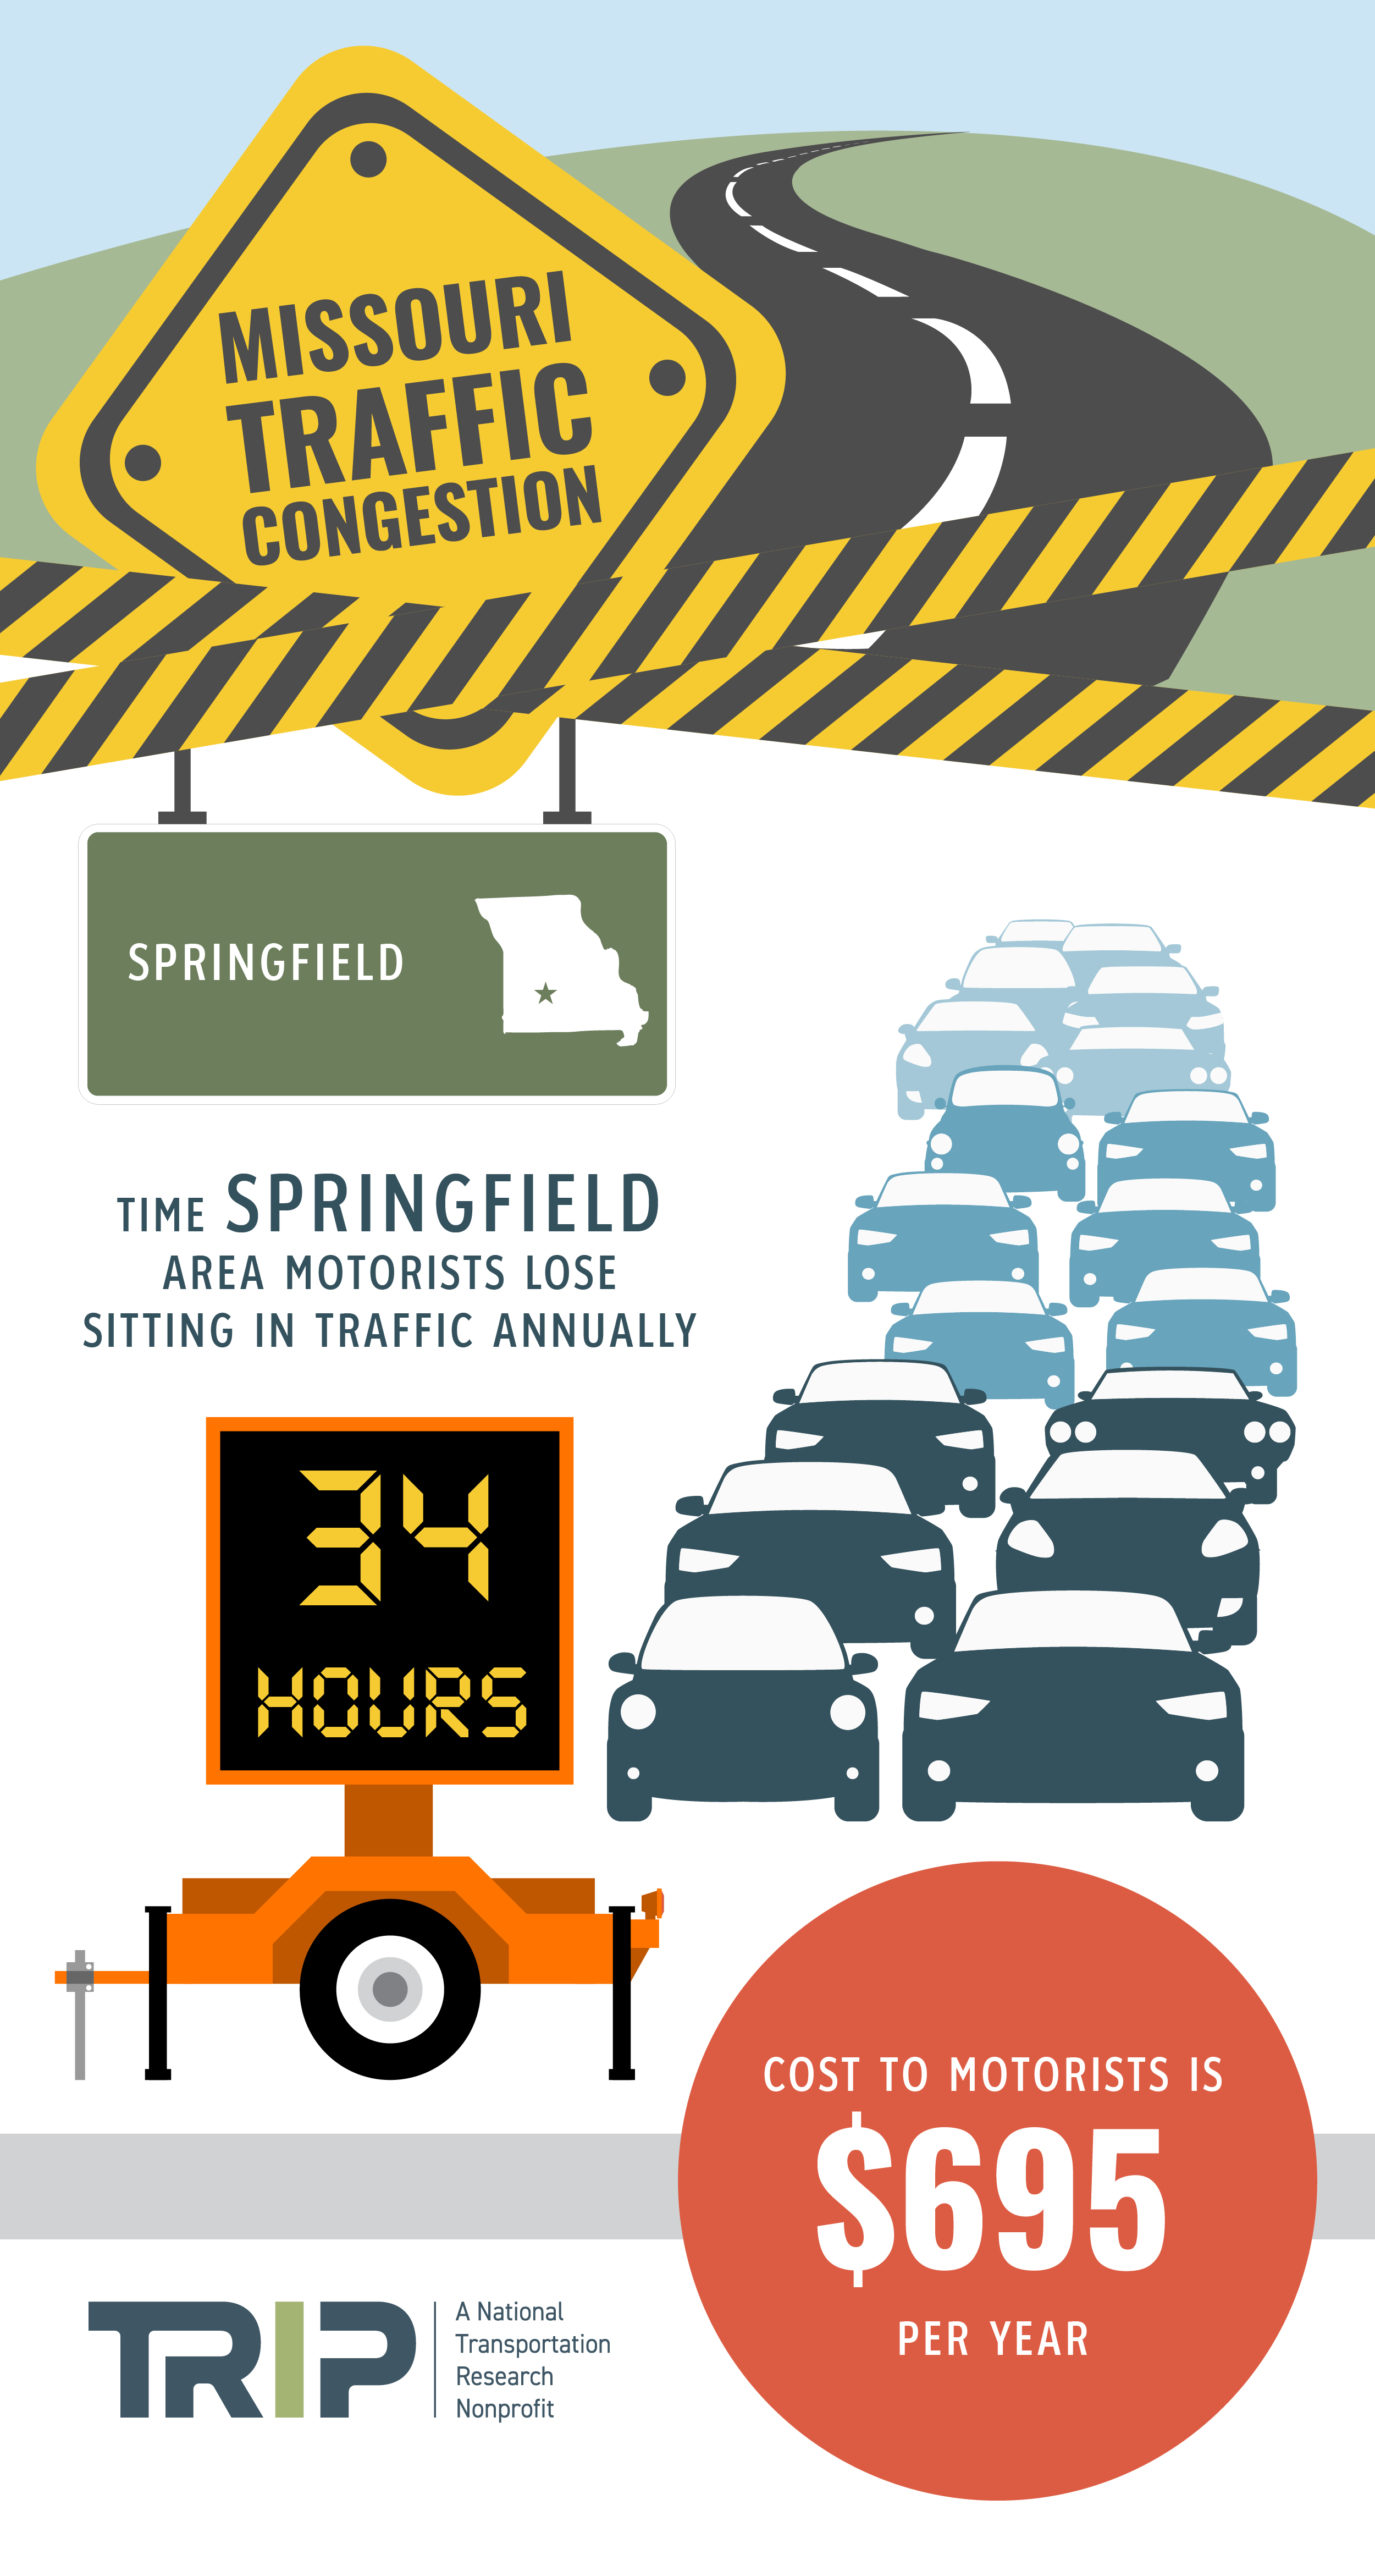 Springfield Traffic Congestion Infographic – December 2020